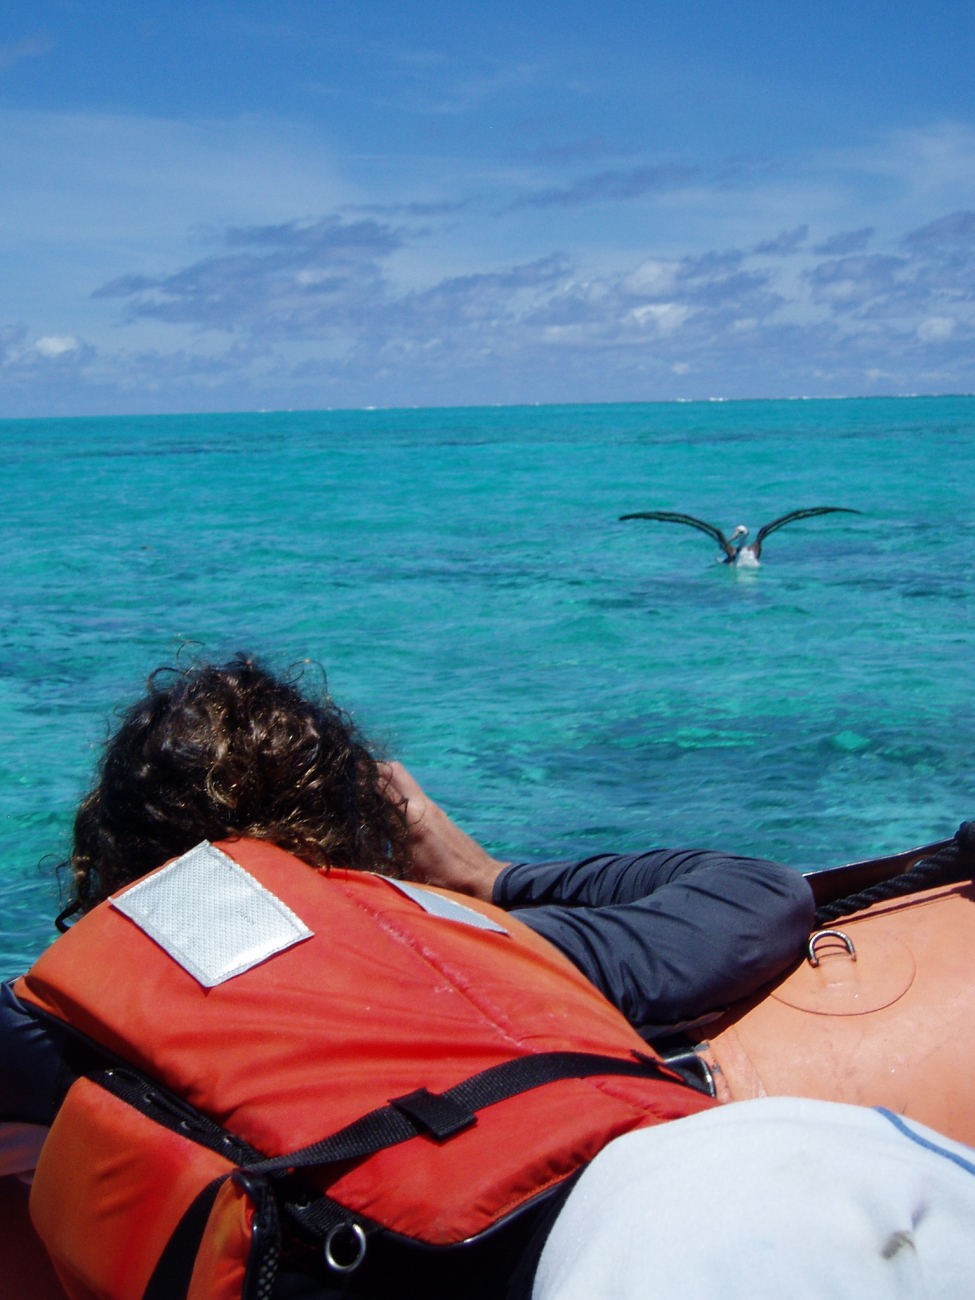 Paulo Maurin of the University of Hawaii photographing an albatross on thewater